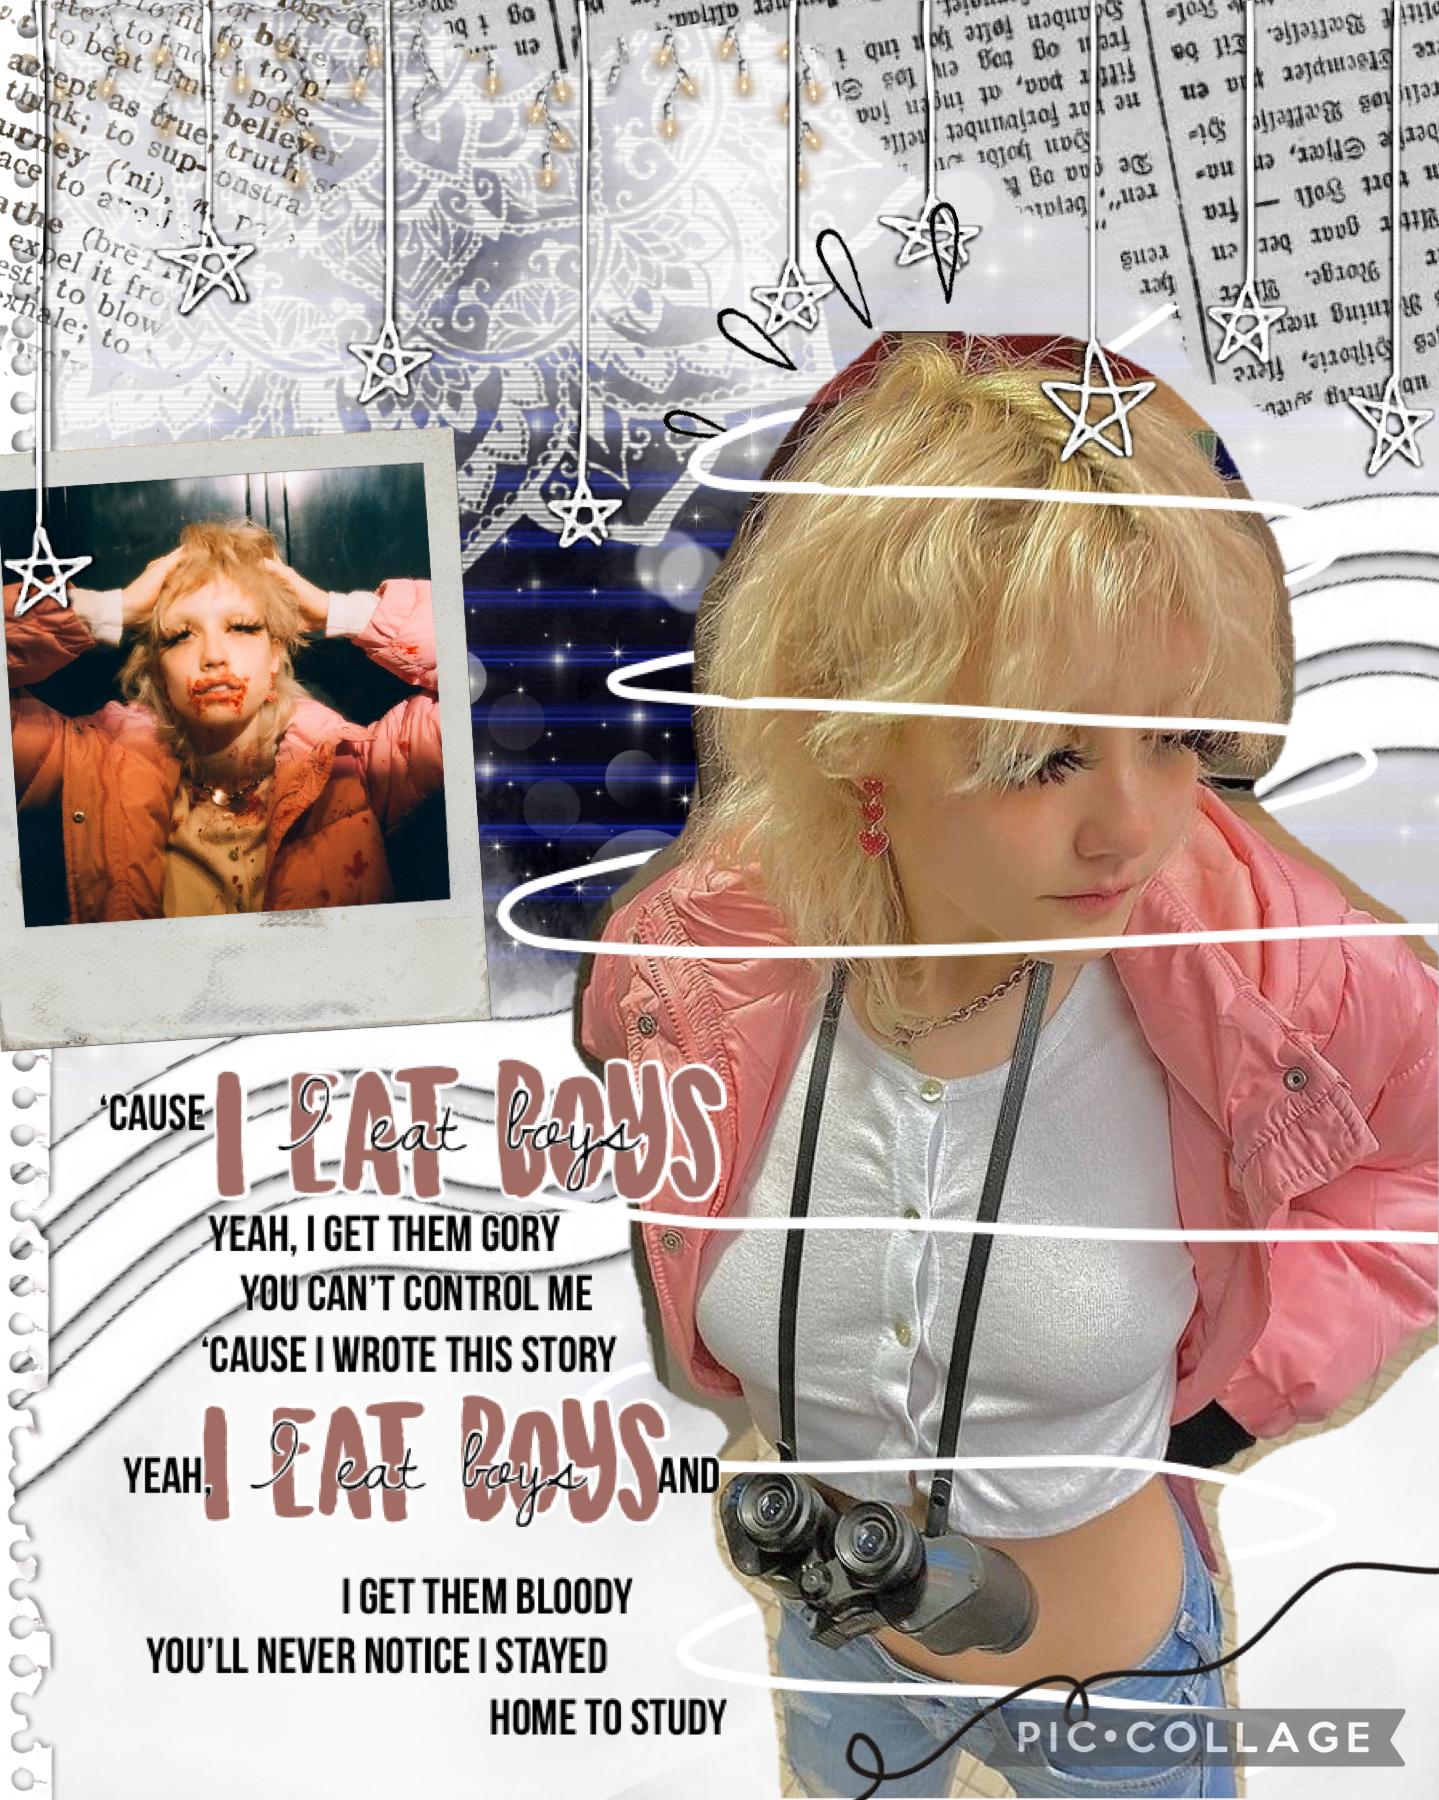 💖 TAP 💖
💖 chloe moriondo collage!! 💖
💖 Lyrics from the song ‘I Eat Boys’ 💖
💖 Check comments 😀 💖
💖 ilysm 💖